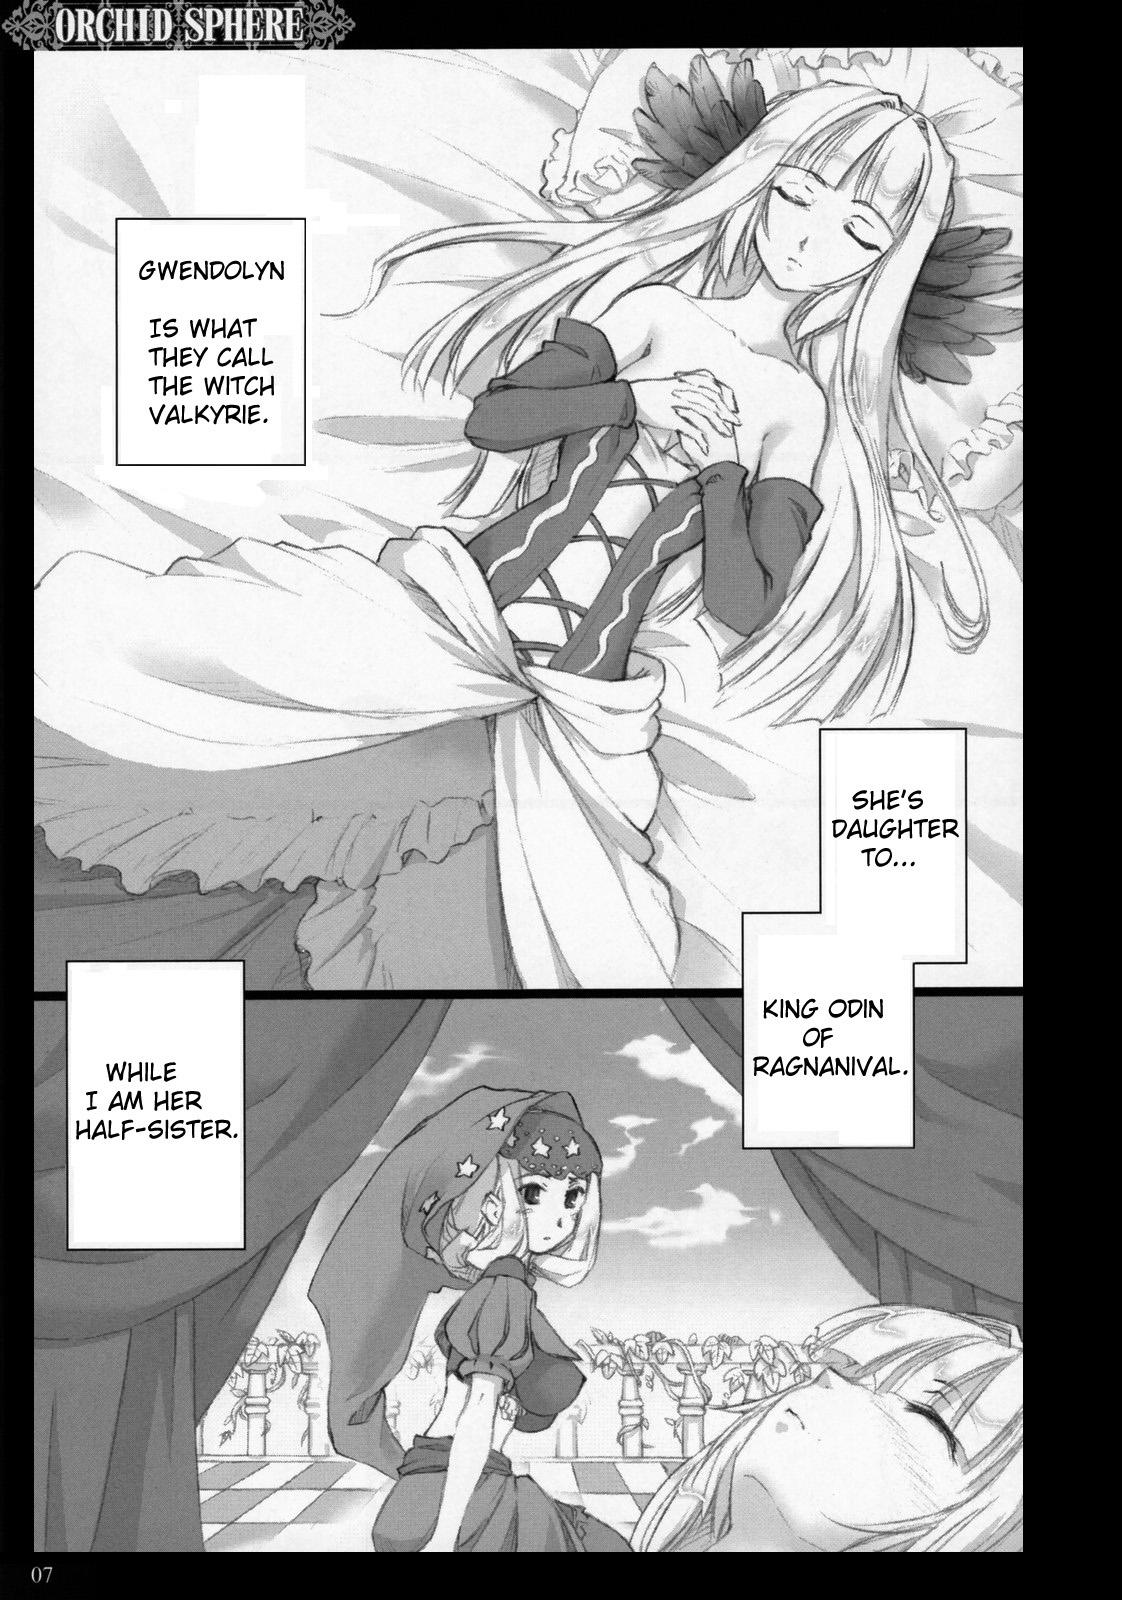 Classy Orchid Sphere - Odin sphere Gay Interracial - Page 6